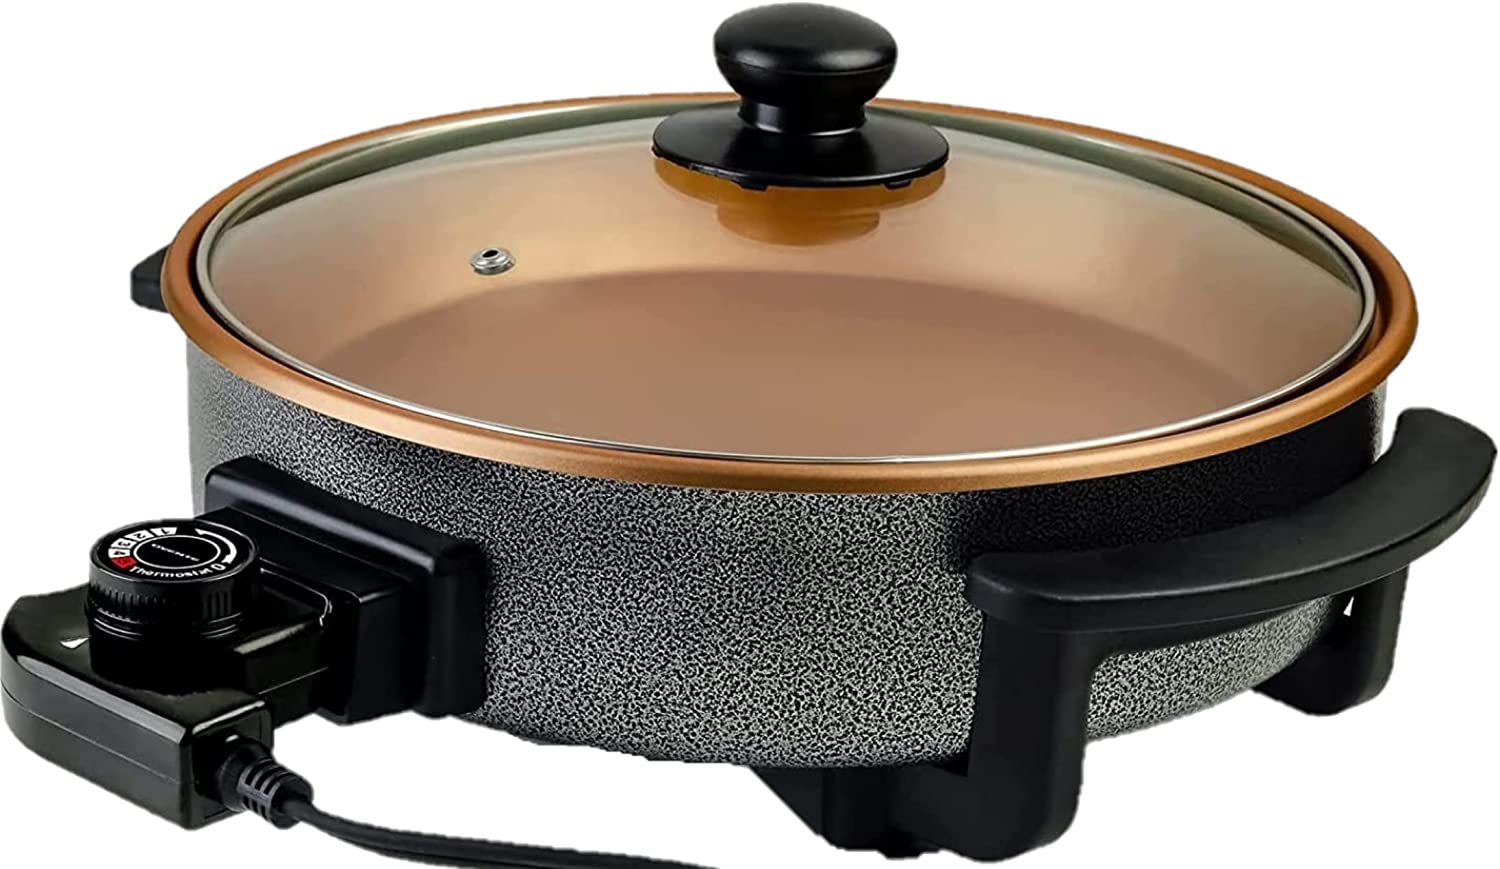 Copper Interior Temperature Controller 1400-Watts Ovente SK11112CO Electric Skillet with Non-Stick Aluminum Body Cool-Touch Handles Tempered Glass Cover 12 Inch